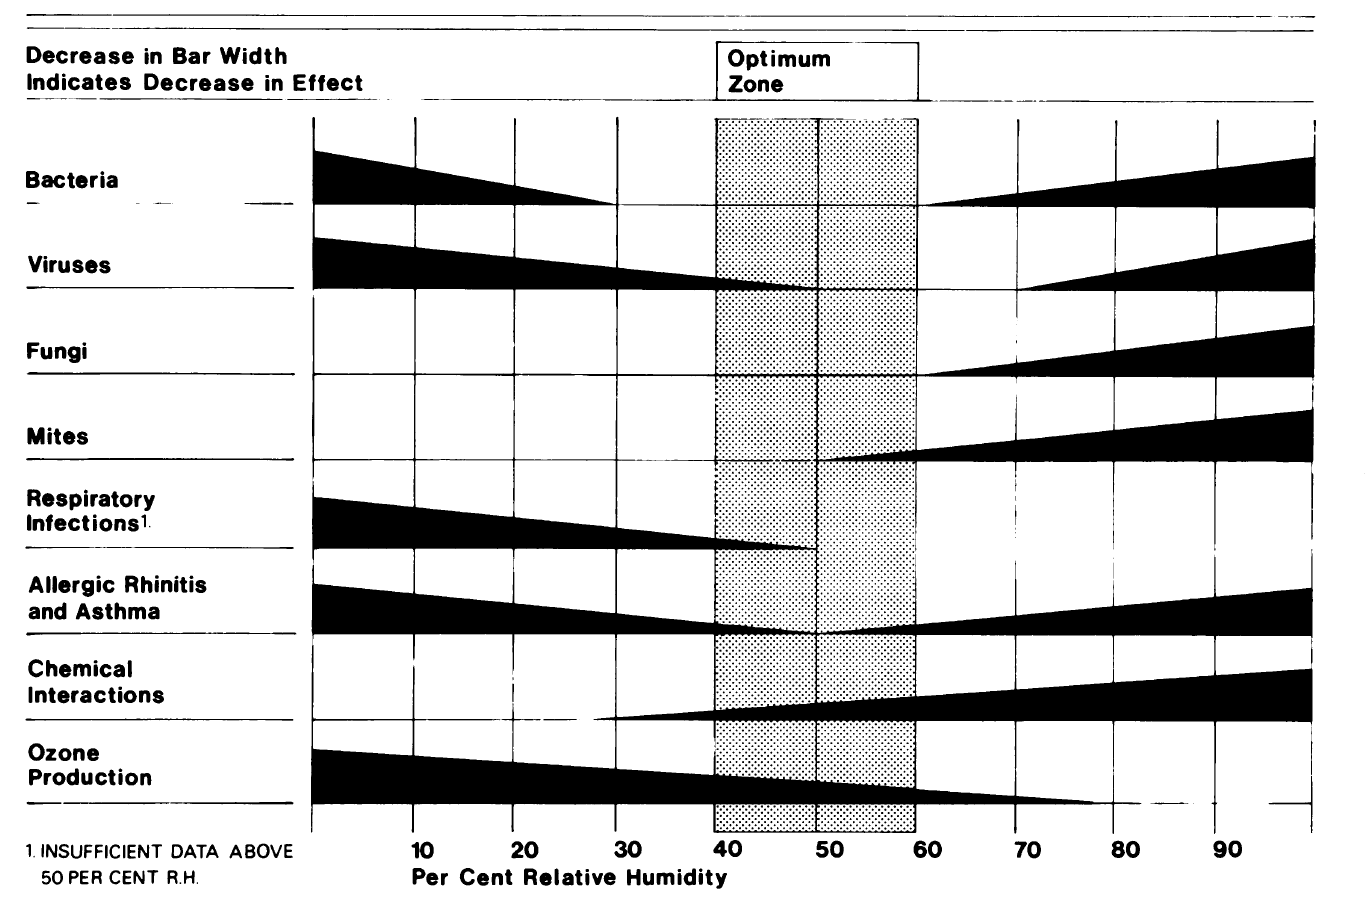 The Sterling Chart, From A 1986 Research Paper, Suggests An Optimum Zone For Relative Humidity